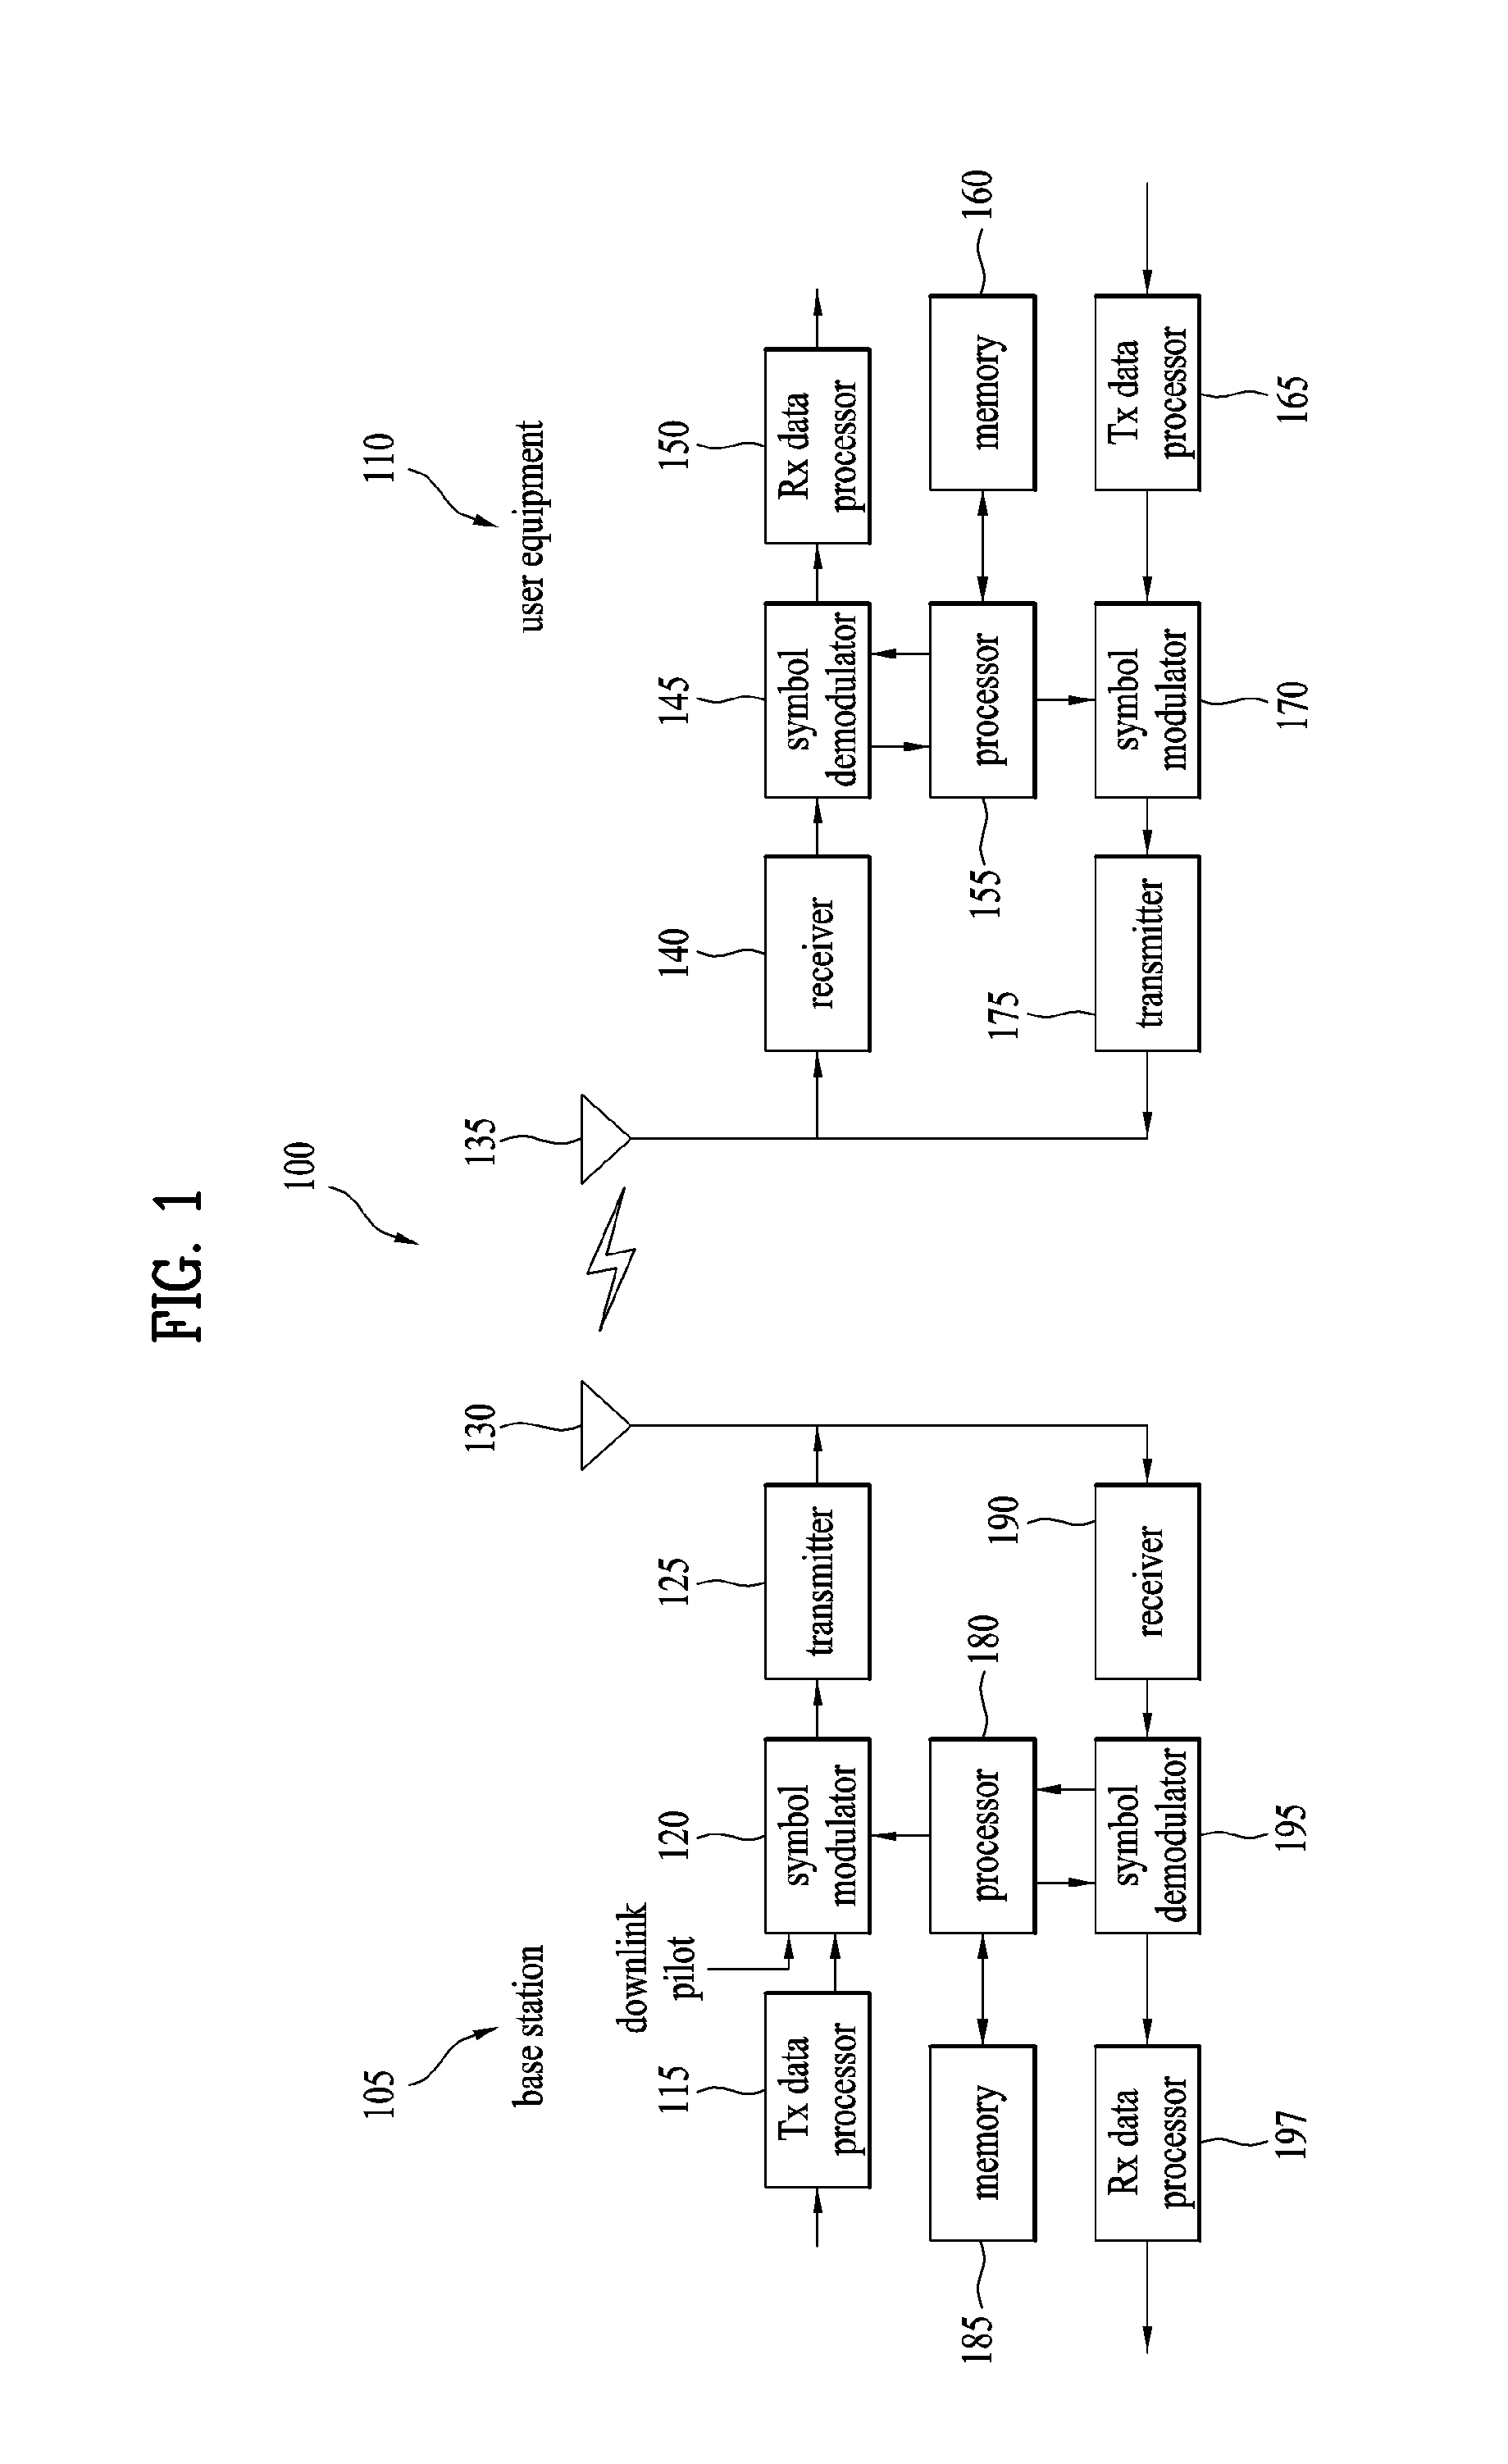 Method for transmitting power headroom report in network supporting interworkings between multiple communication systems, and apparatus therefor